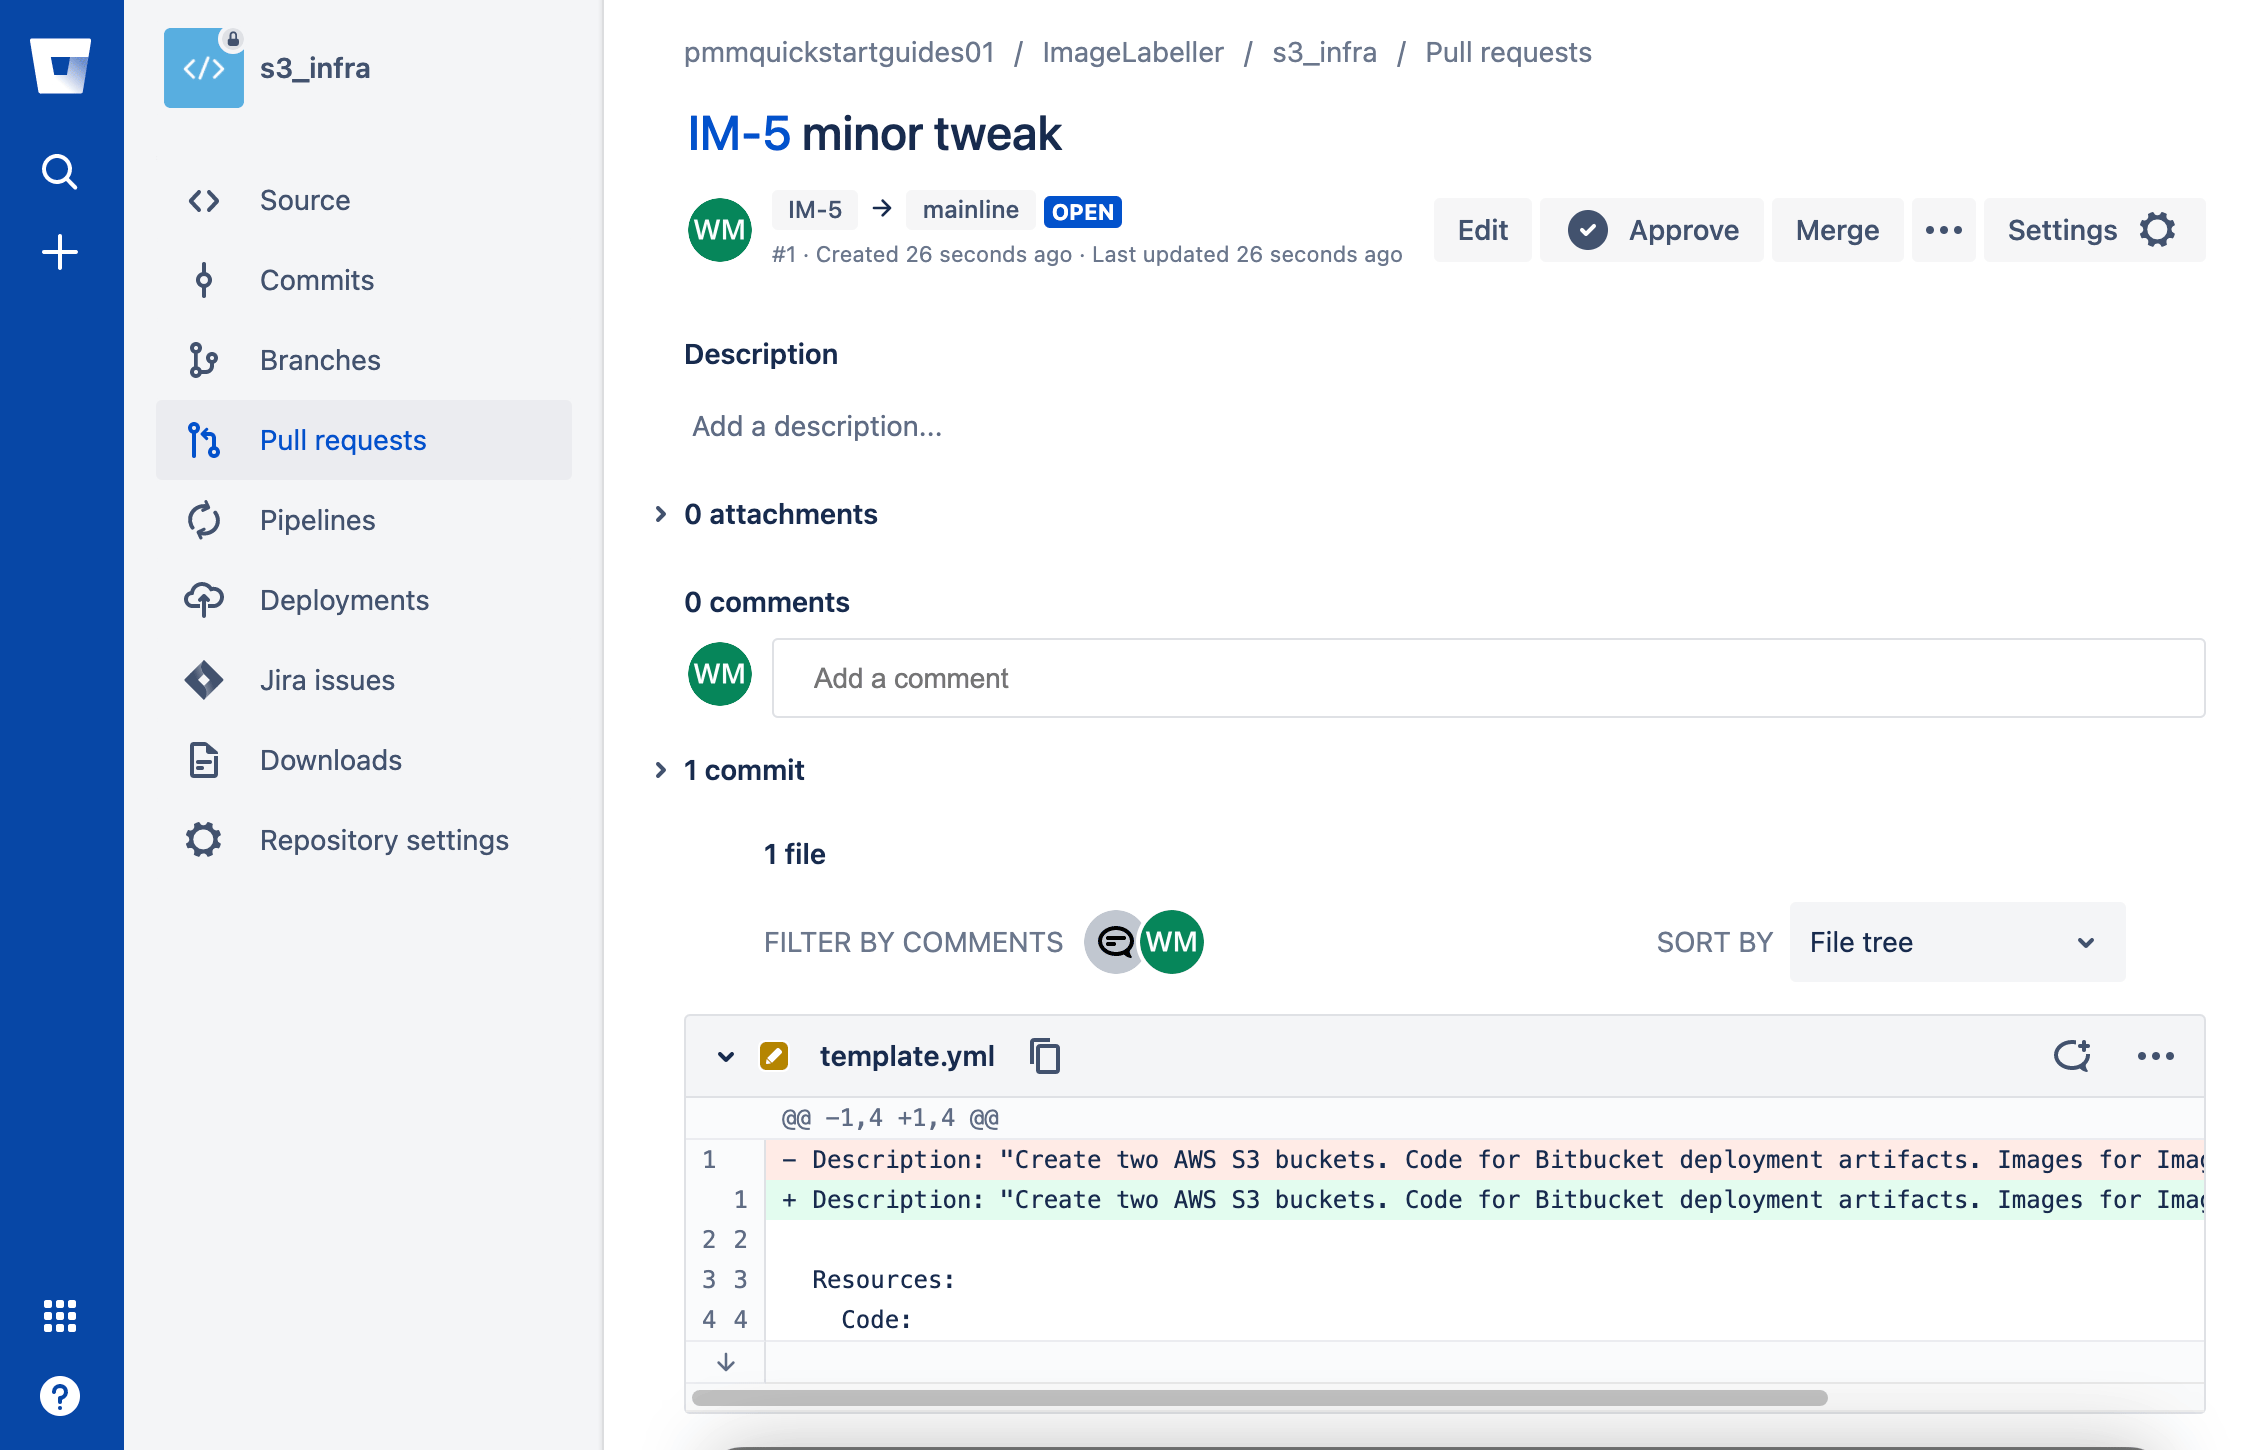 Approve and merge pull request in Bitbucket